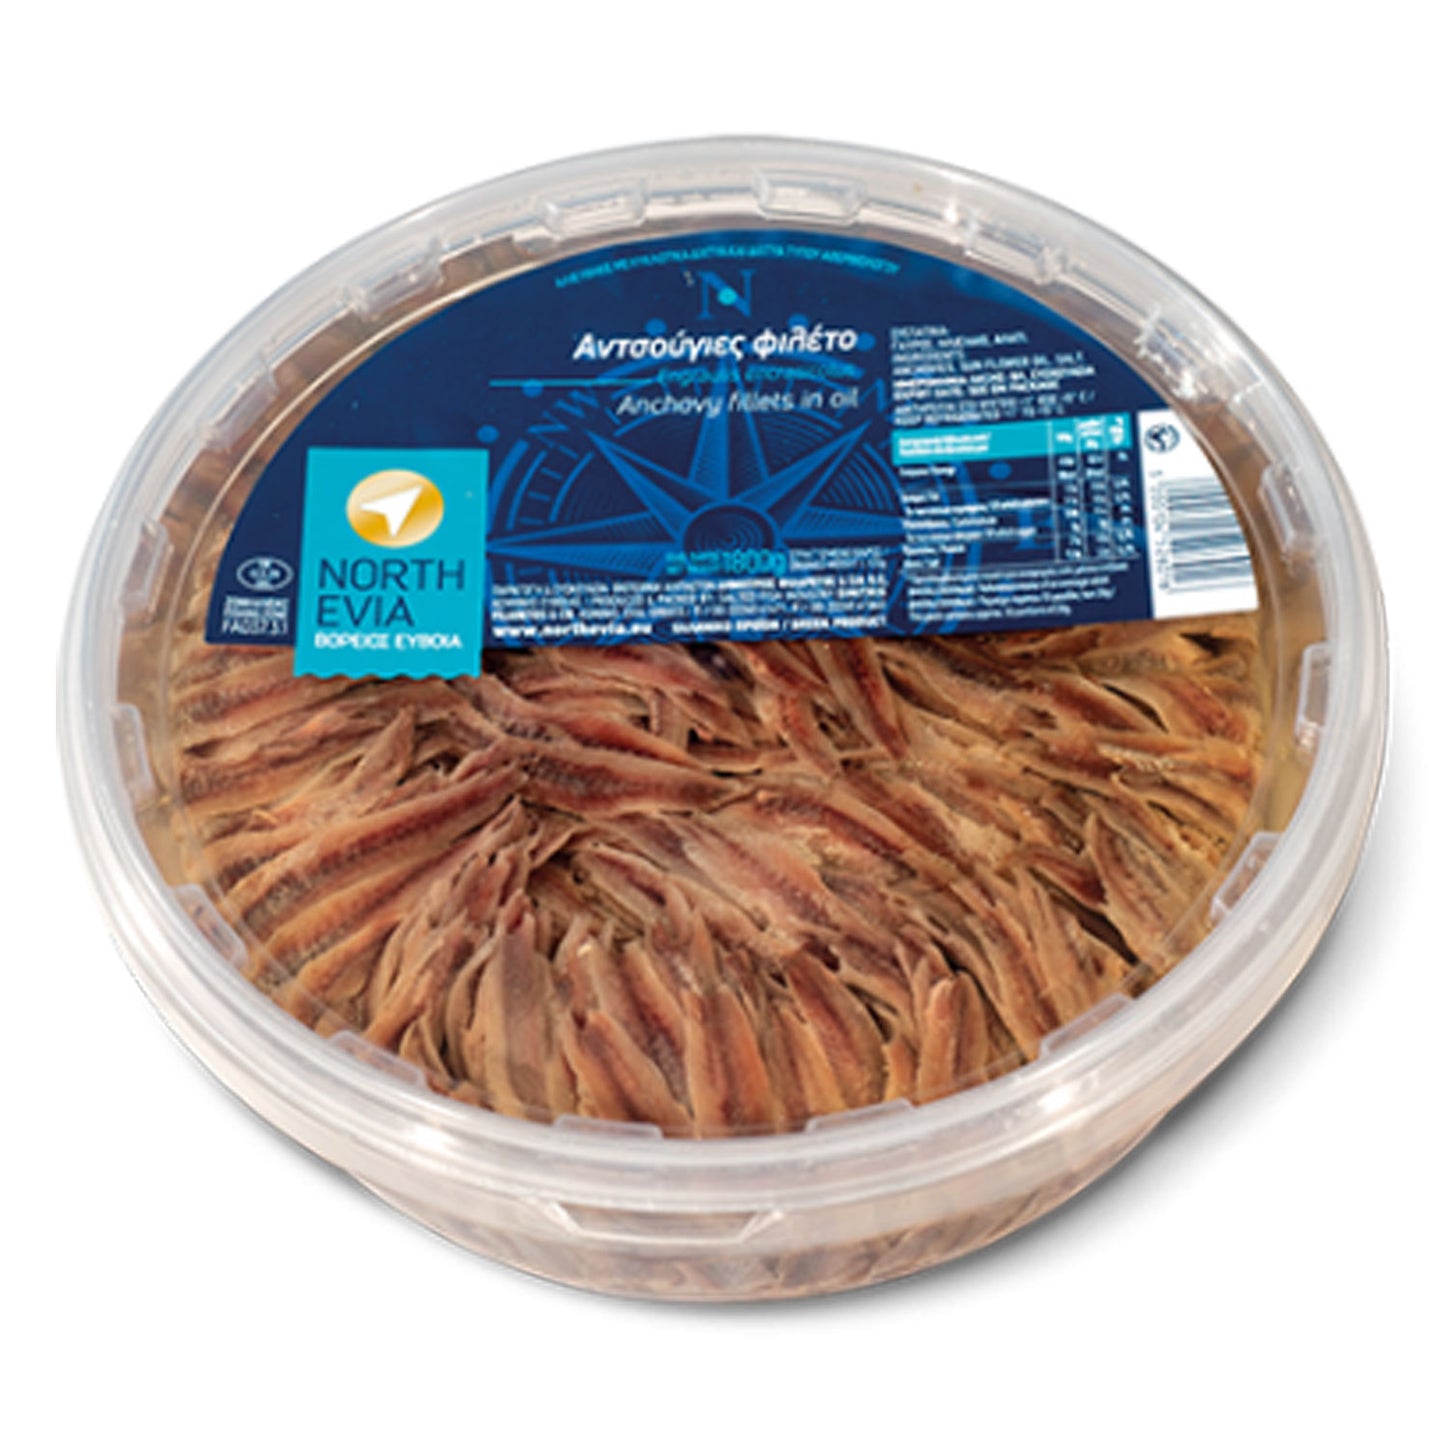 Anchovy fillets from Evia - 2kg